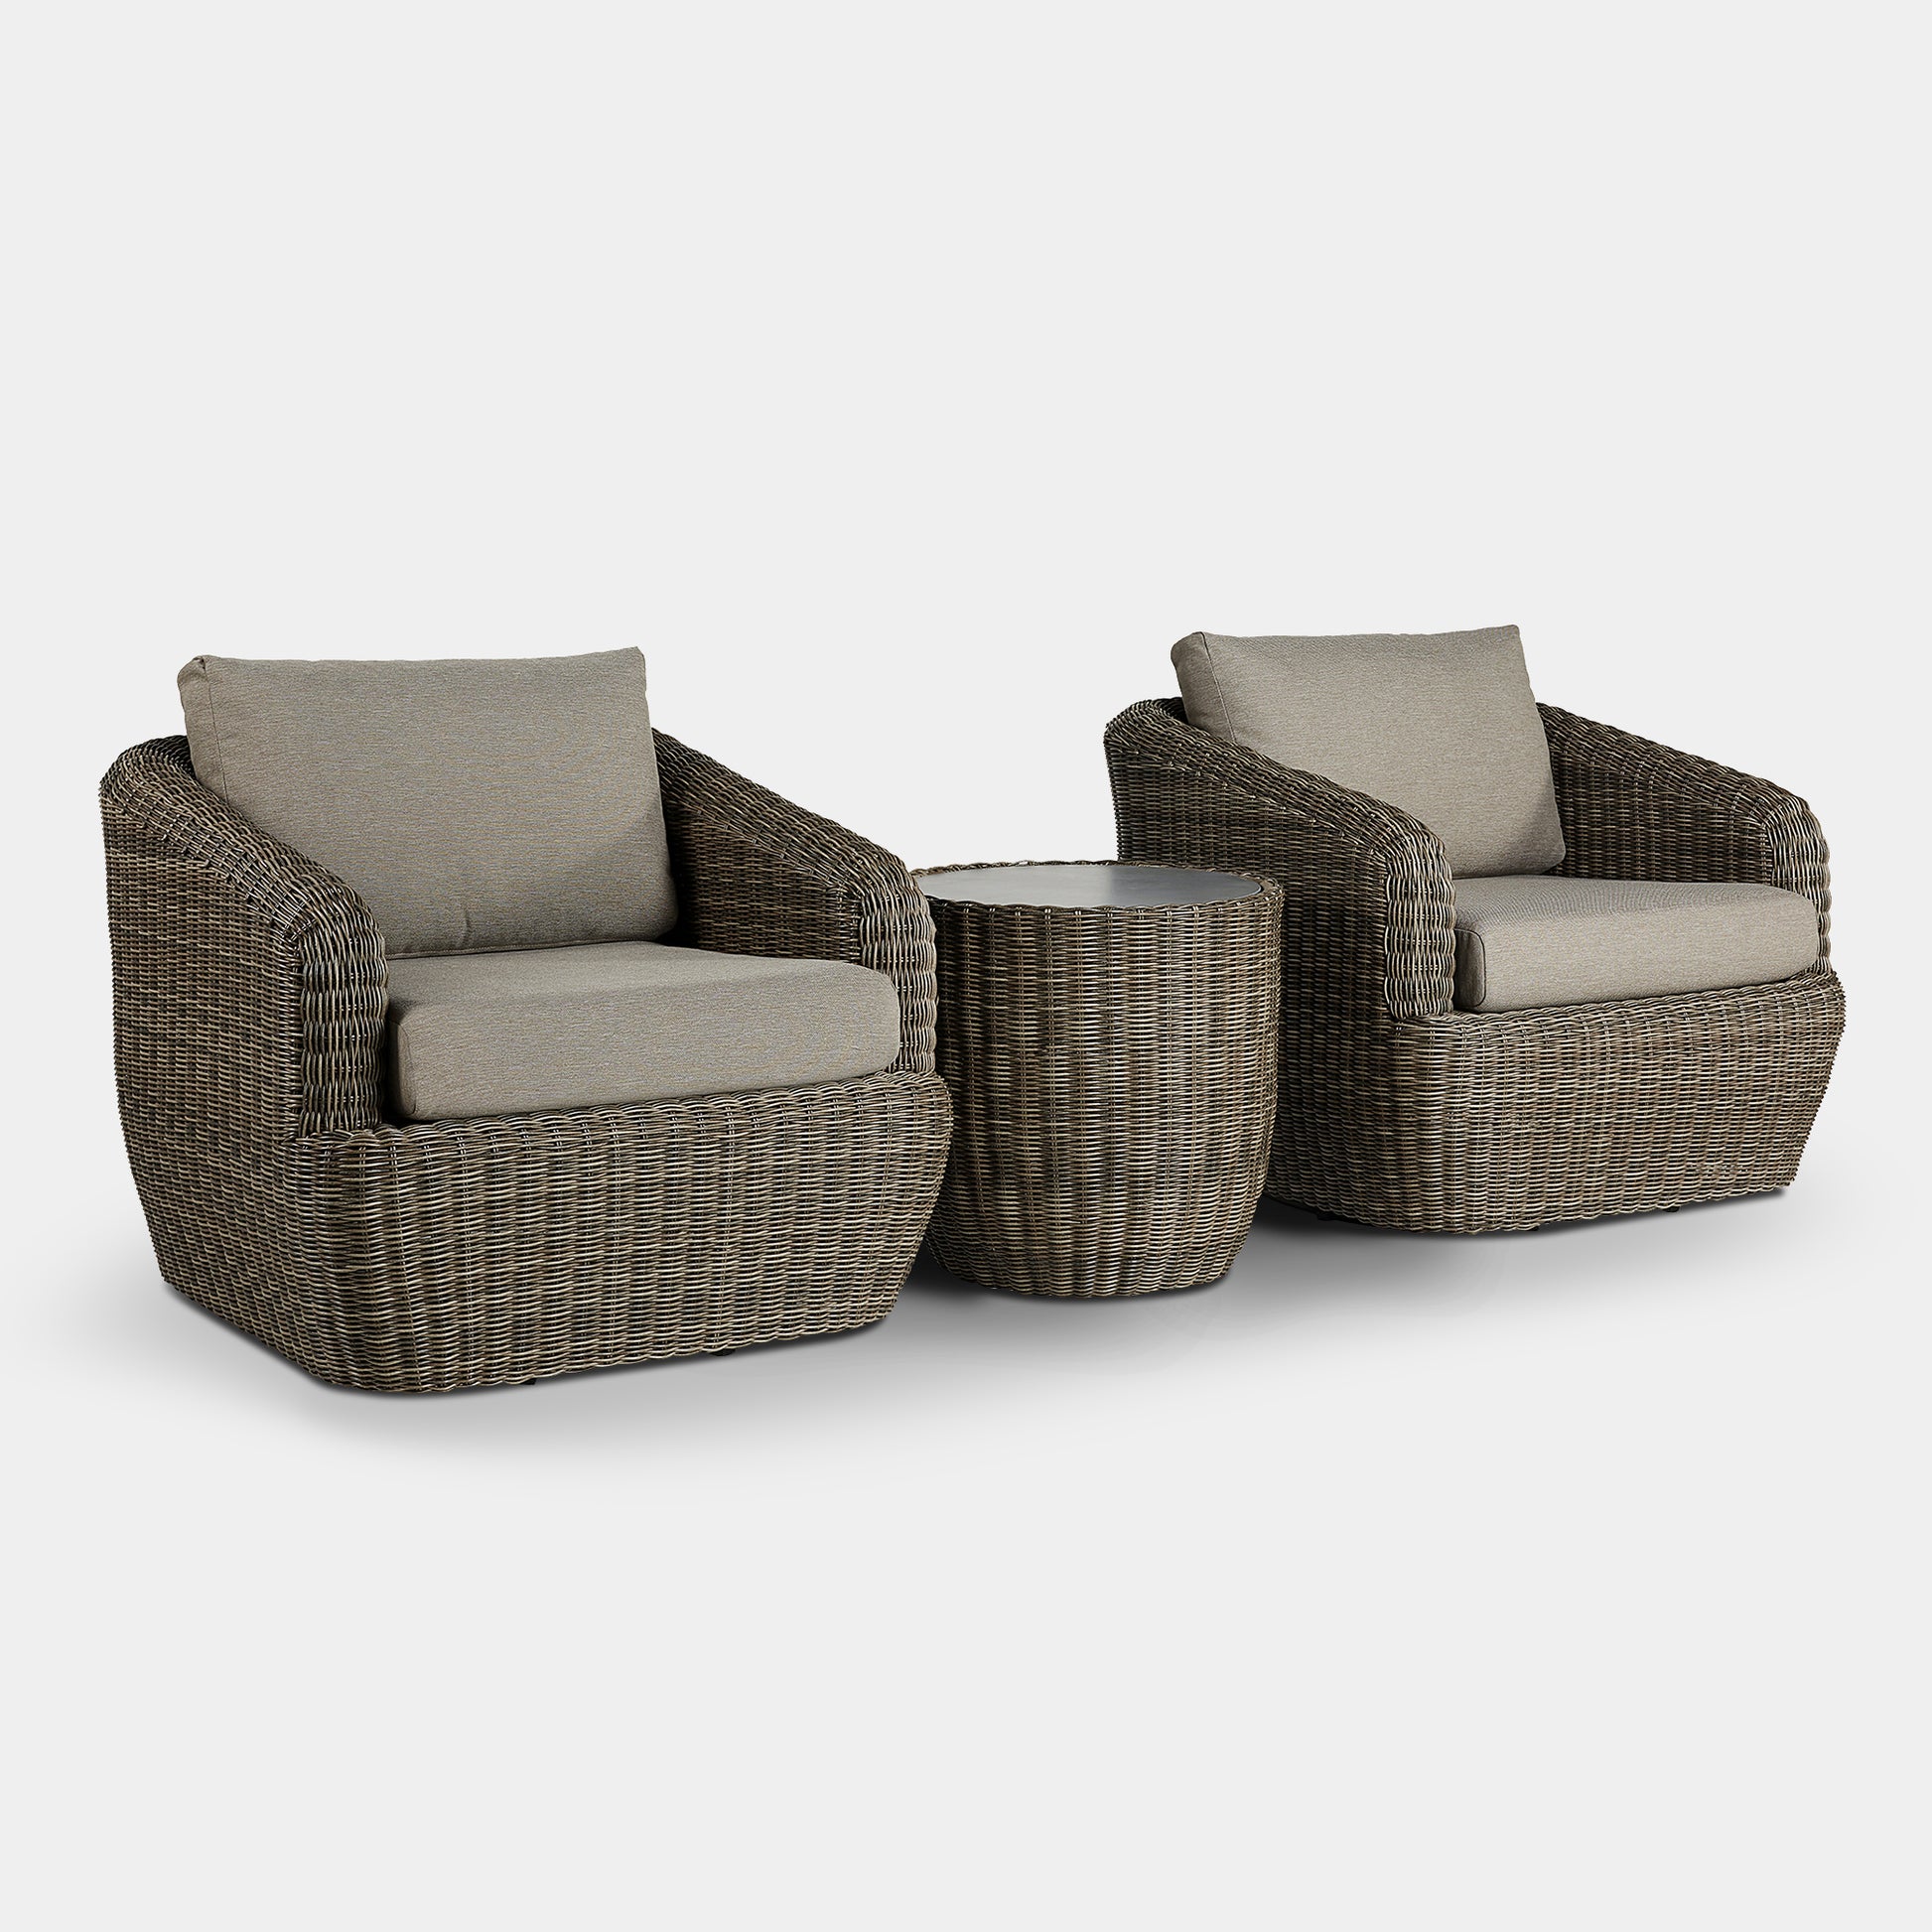 CHITA Living outdoor chair